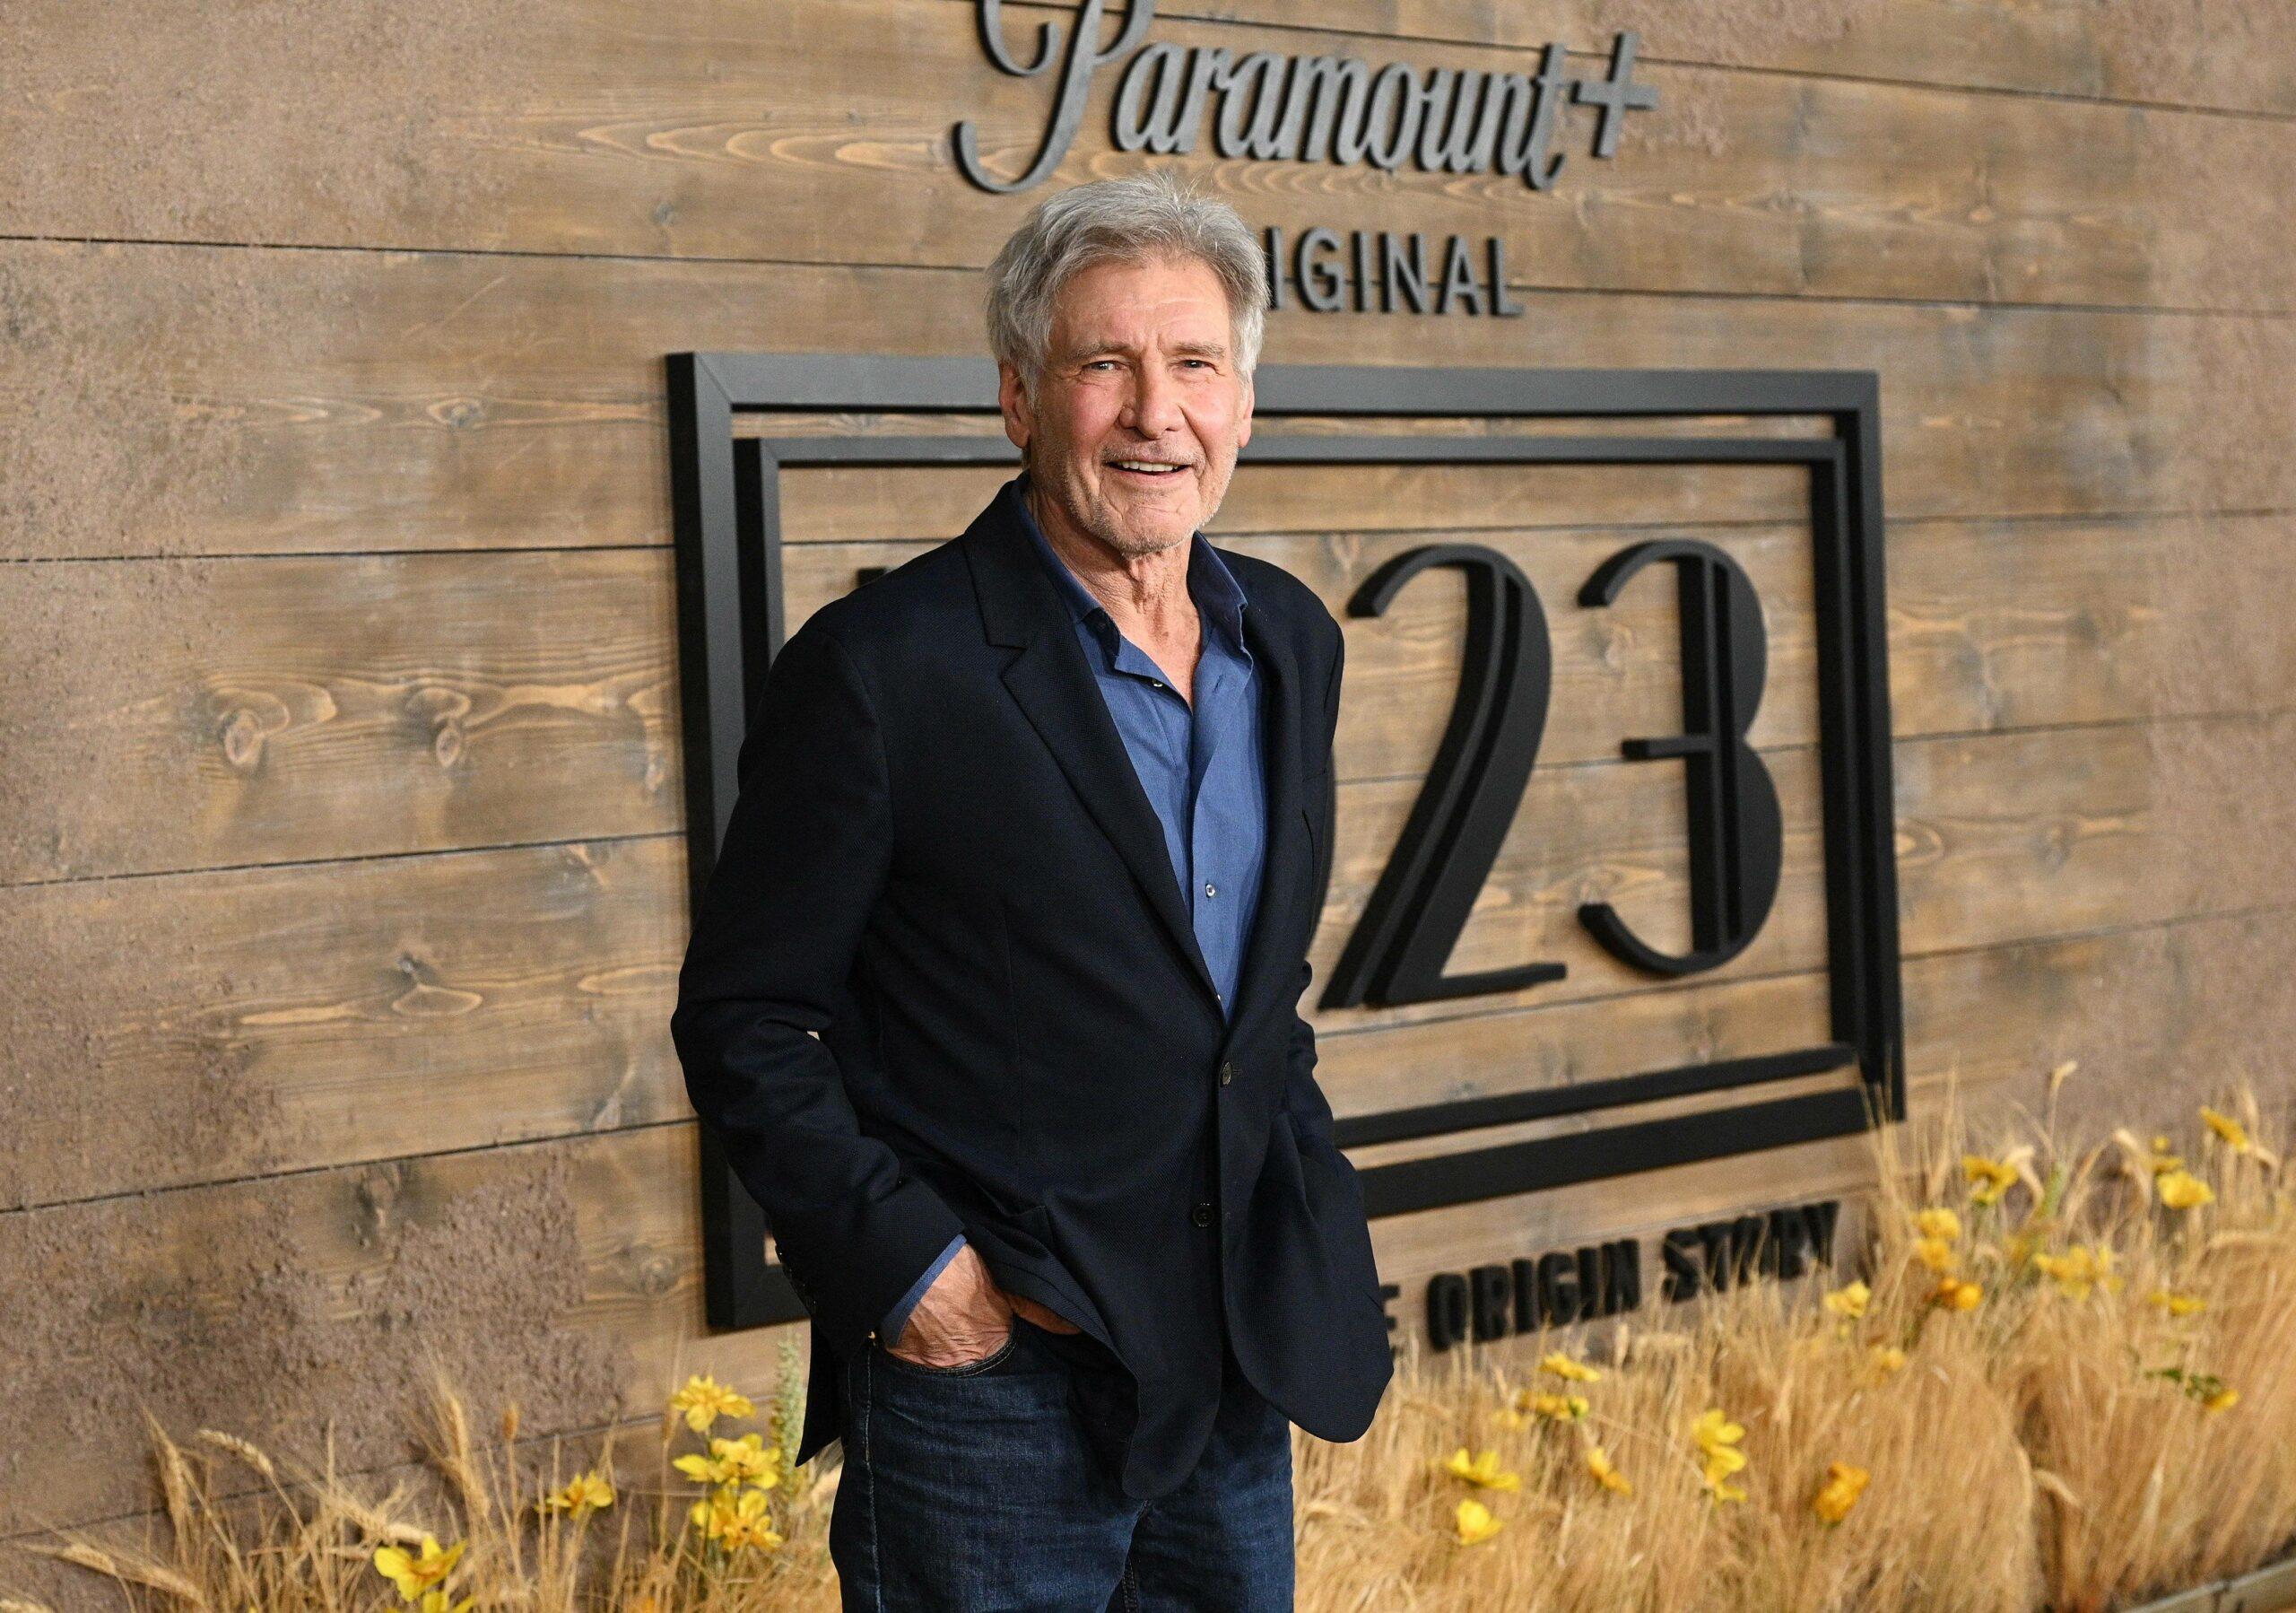 Harrison Ford at the debut for Paramount+ series 1923 - Los Angeles Premiere